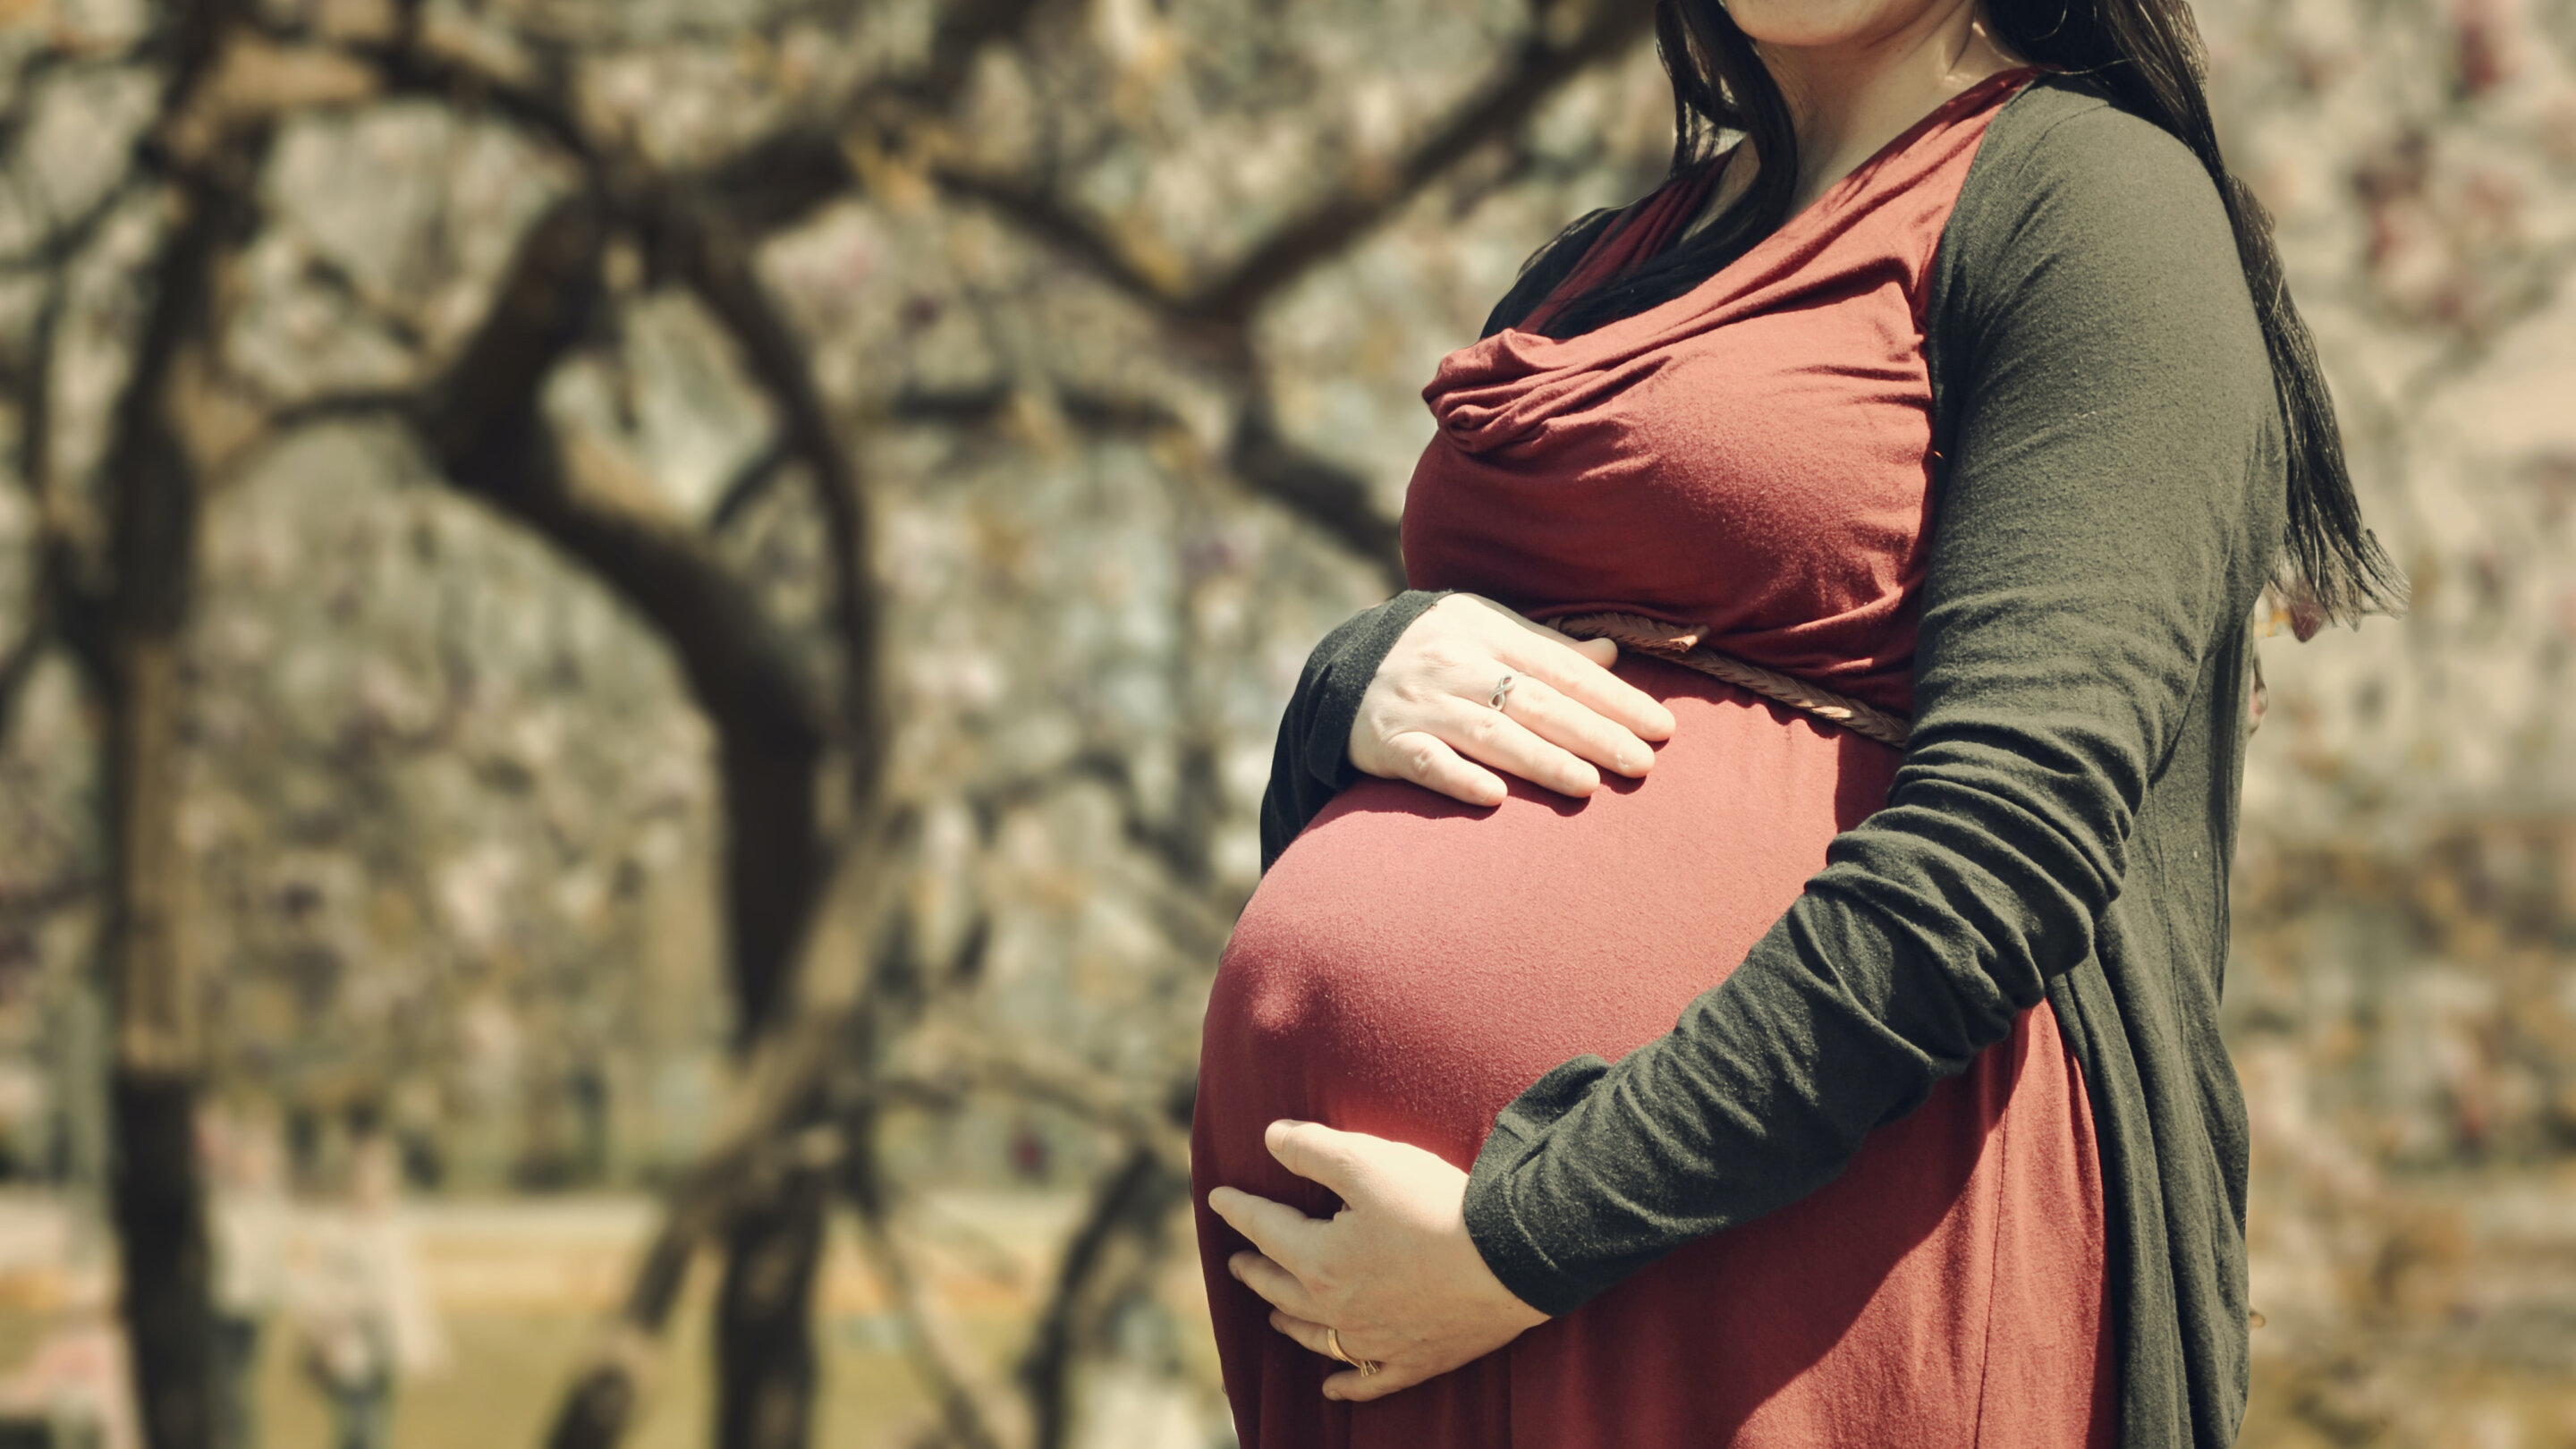 Pregnant women are missing vital nutrients, a situation that could worsen  with plant-based foods